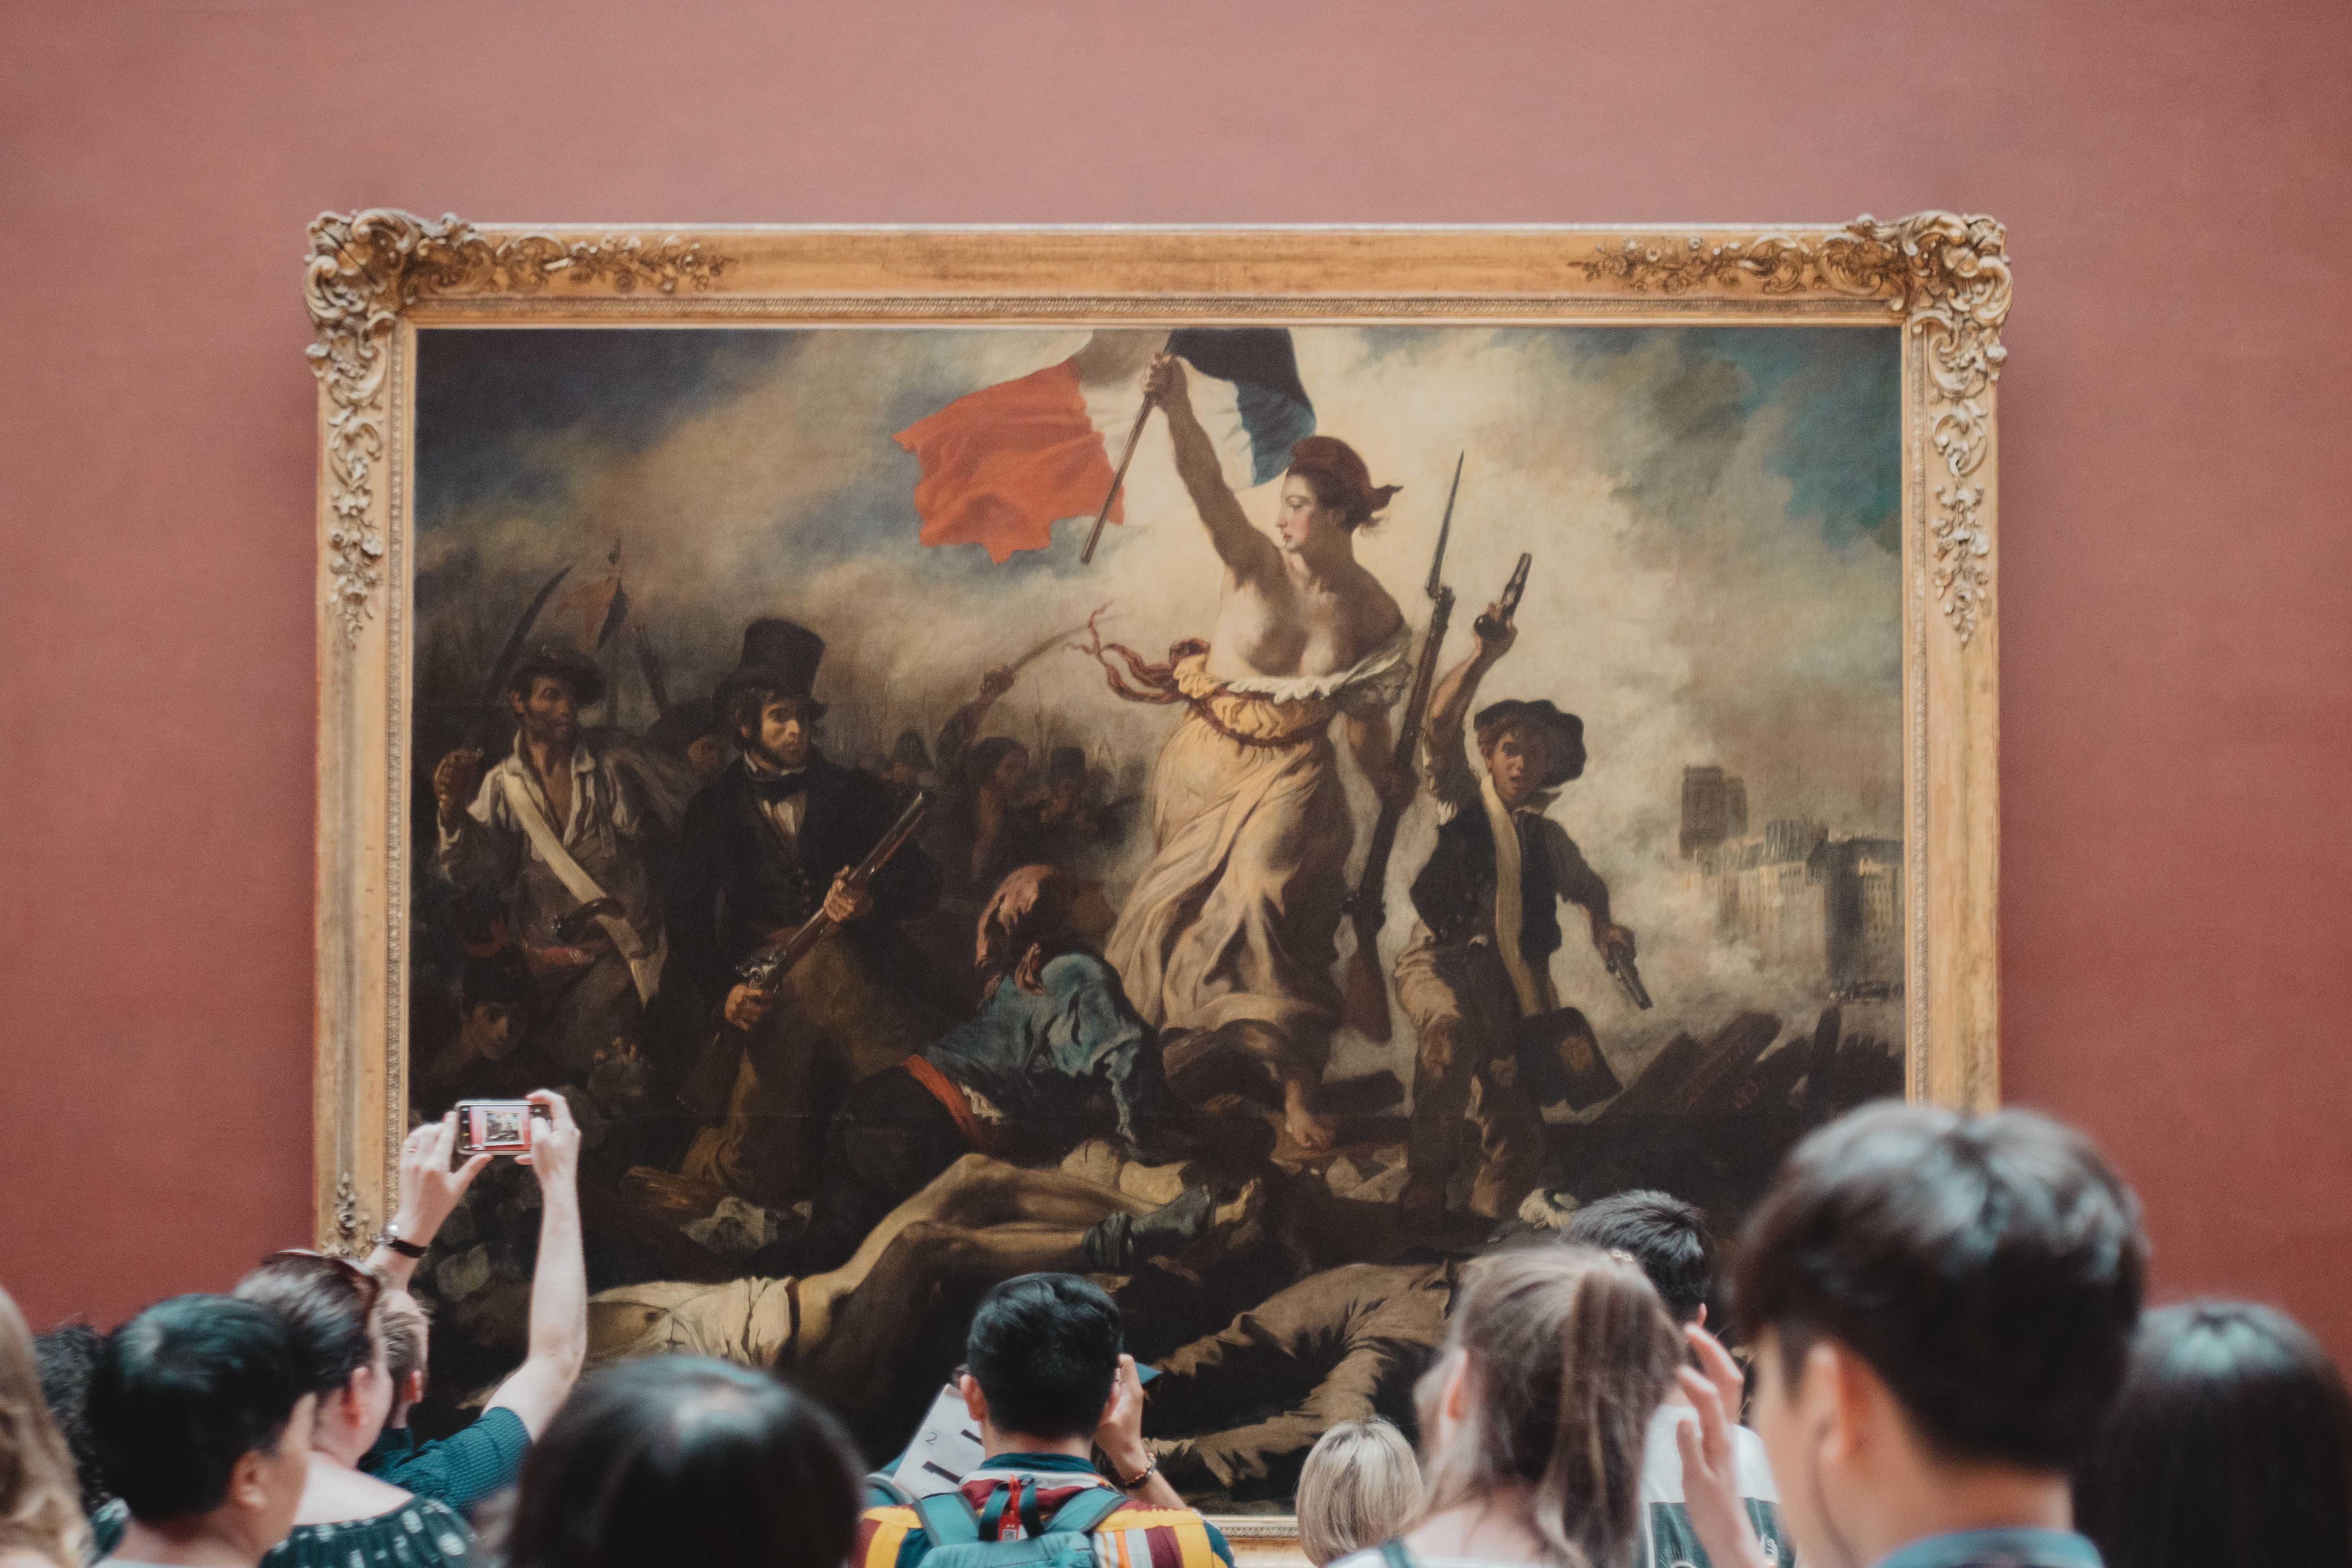 People taking pictures of Liberty leading the people at the Louvre Museum